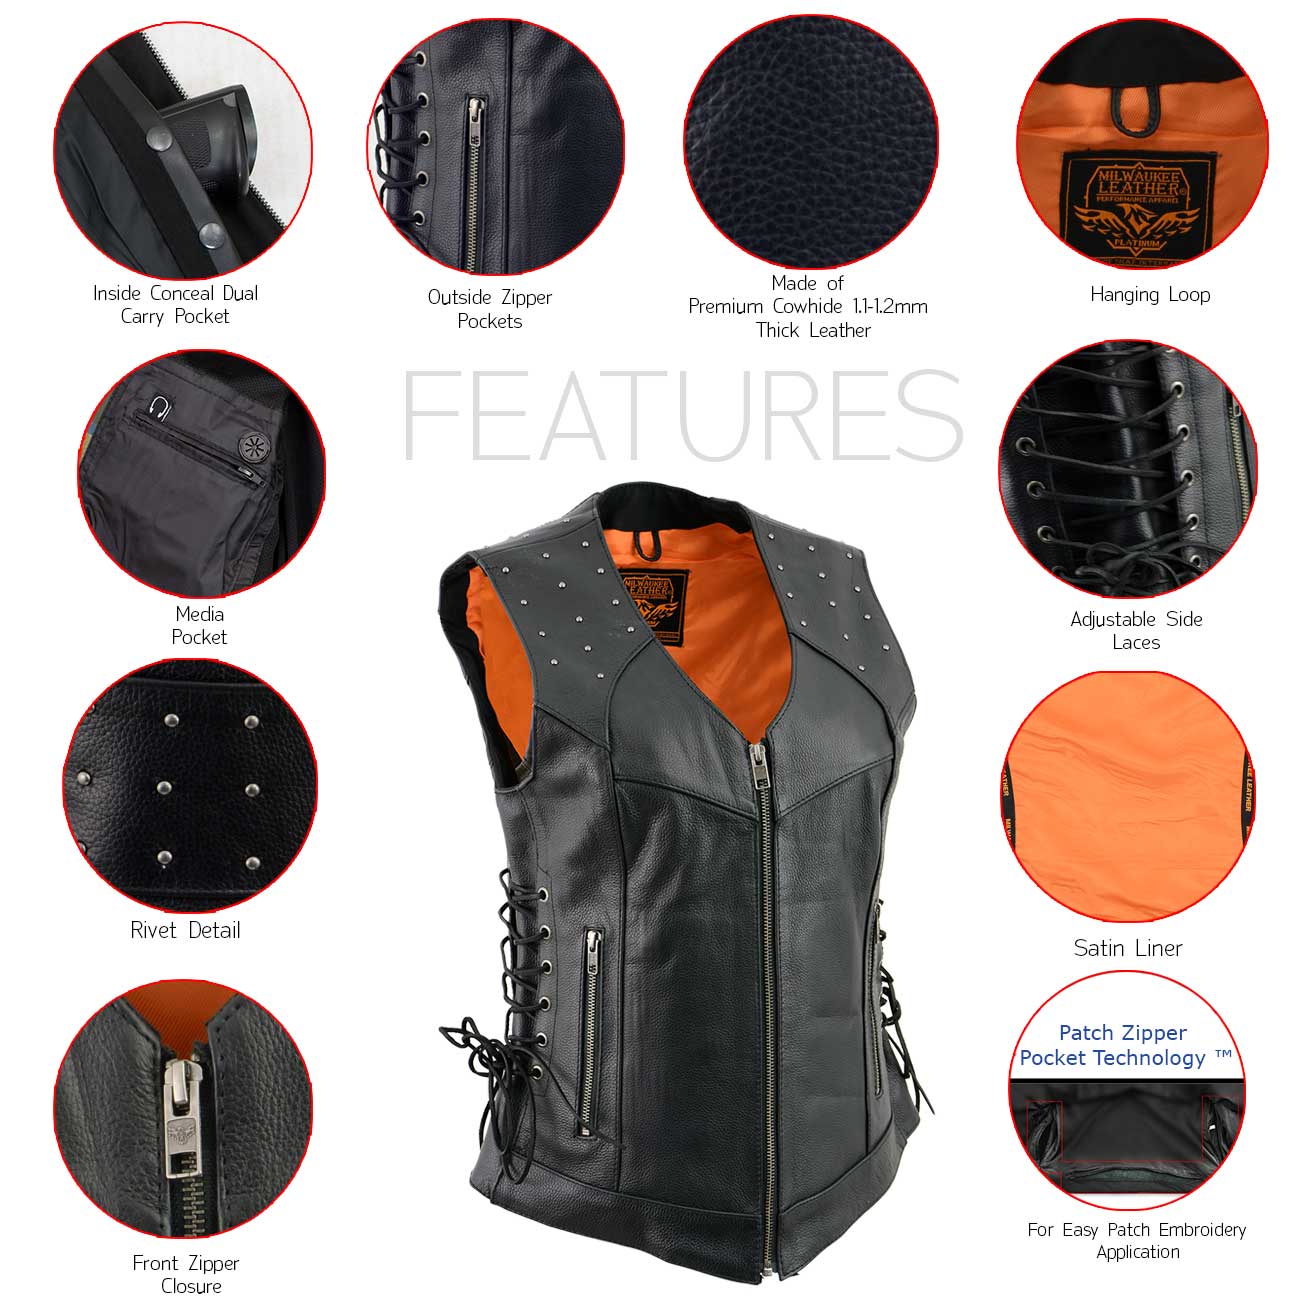 Milwaukee Leather MLL4504 Women's Black Leather Classic V-Neck Riveted Details Motorcycle Rider Vest with Side Lace